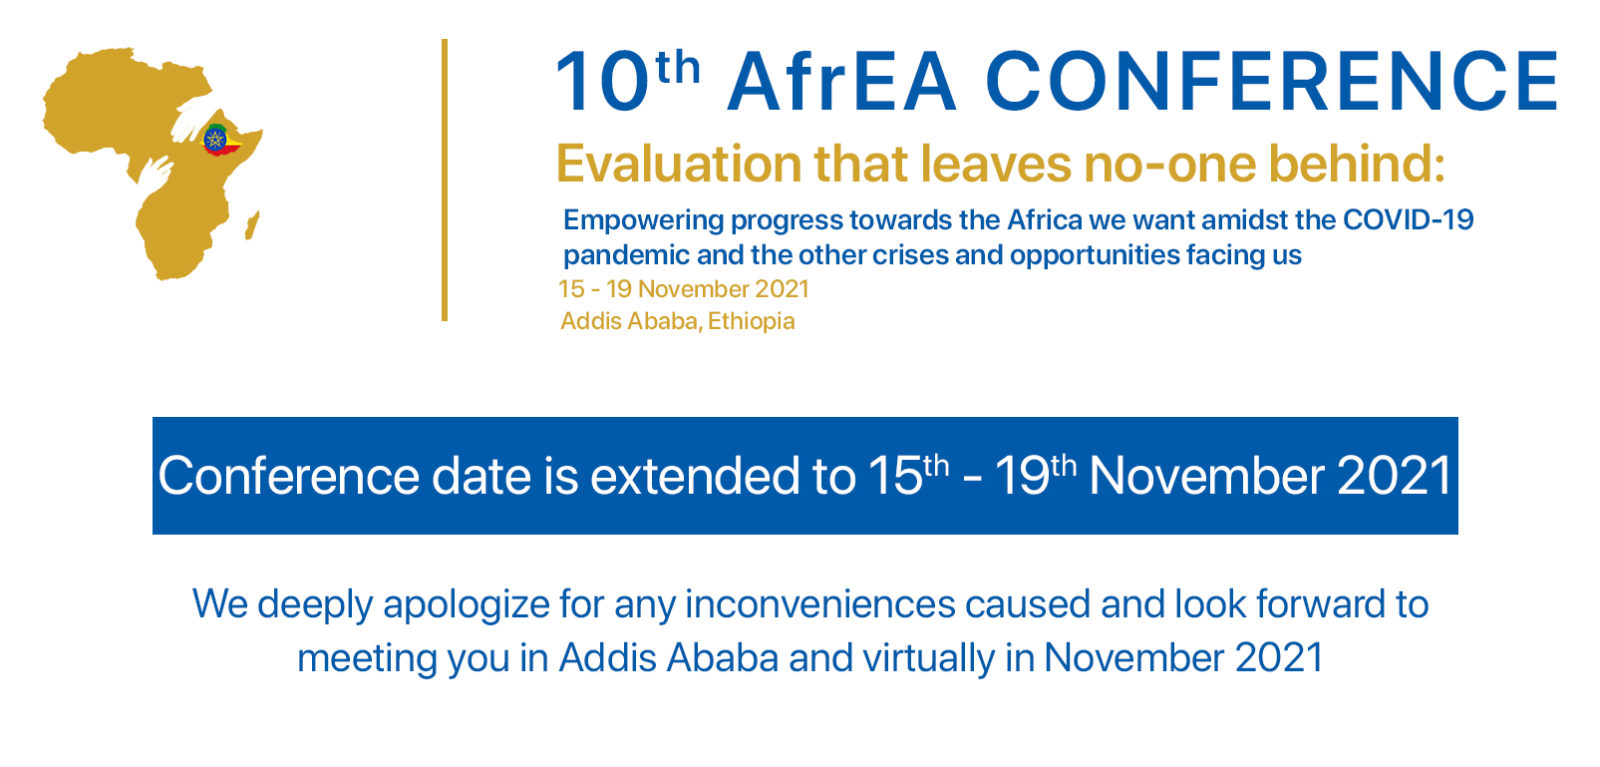 10th AfrEA Conference reschedules to 15th to 19th November 2021